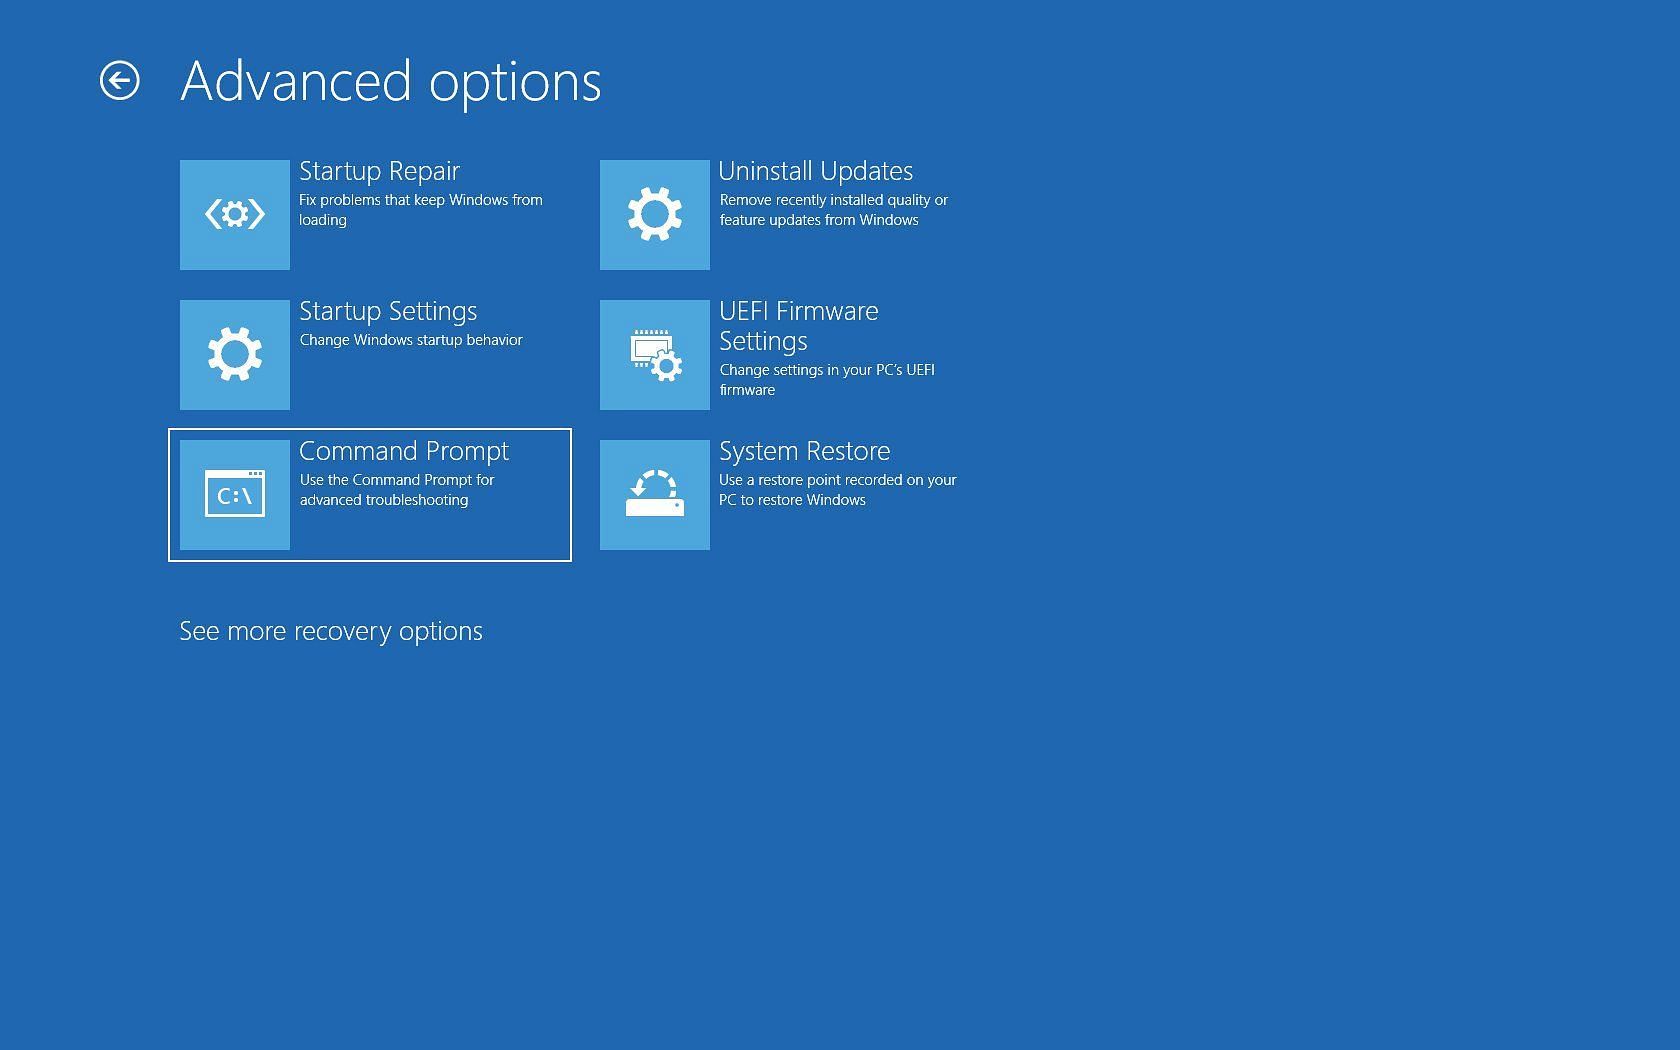 Advanced Options in Windows (Image via Google Images)